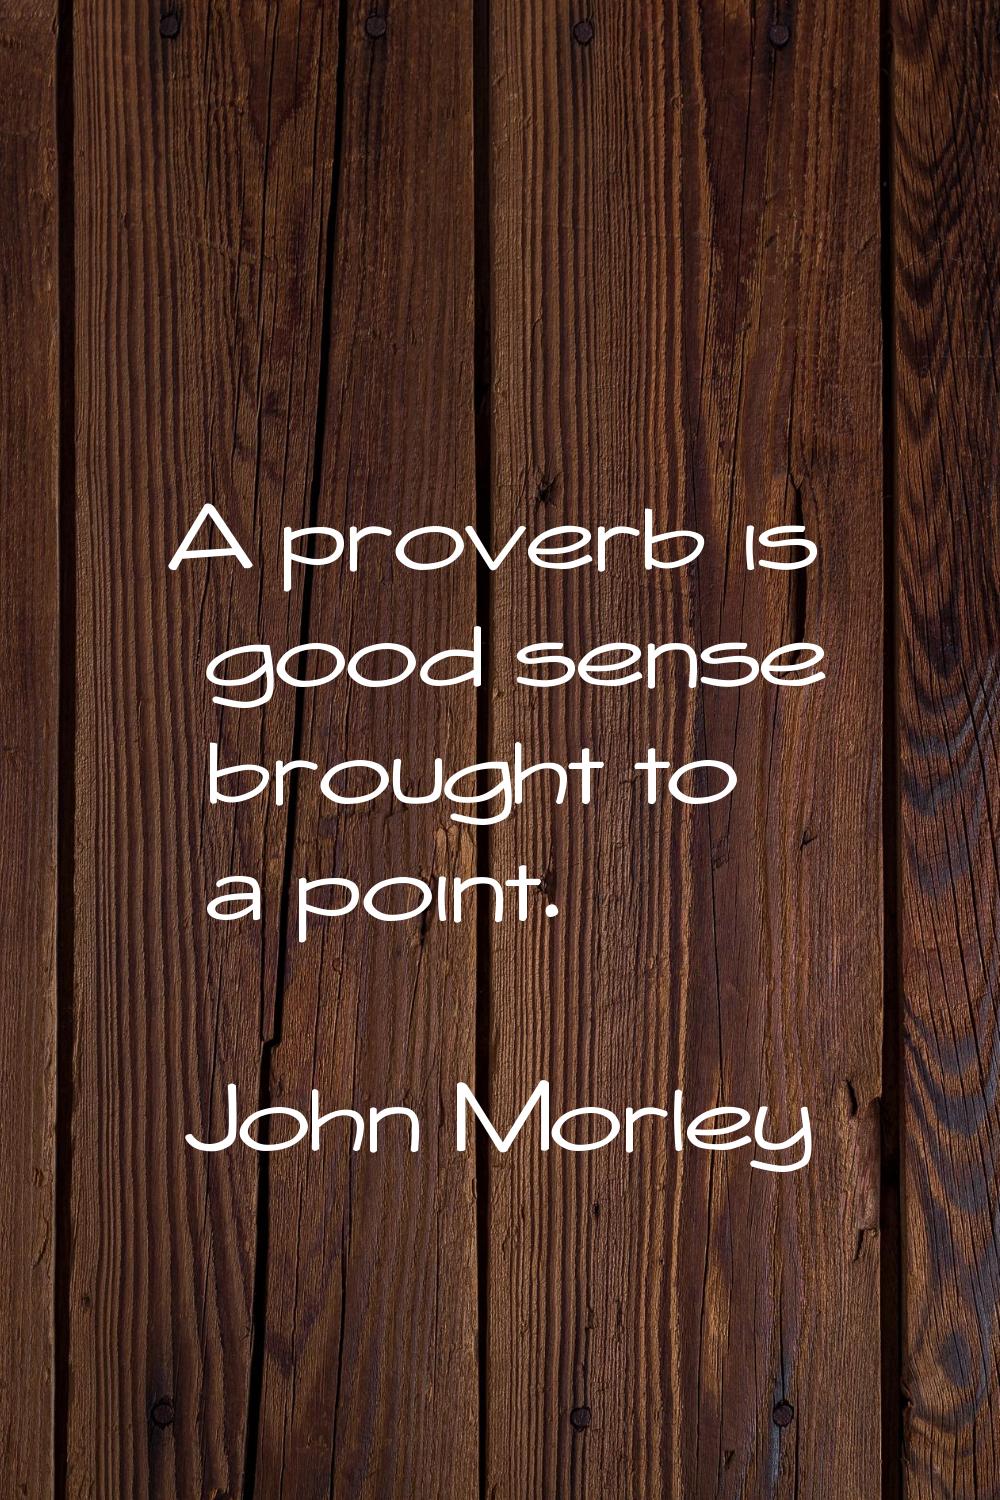 A proverb is good sense brought to a point.